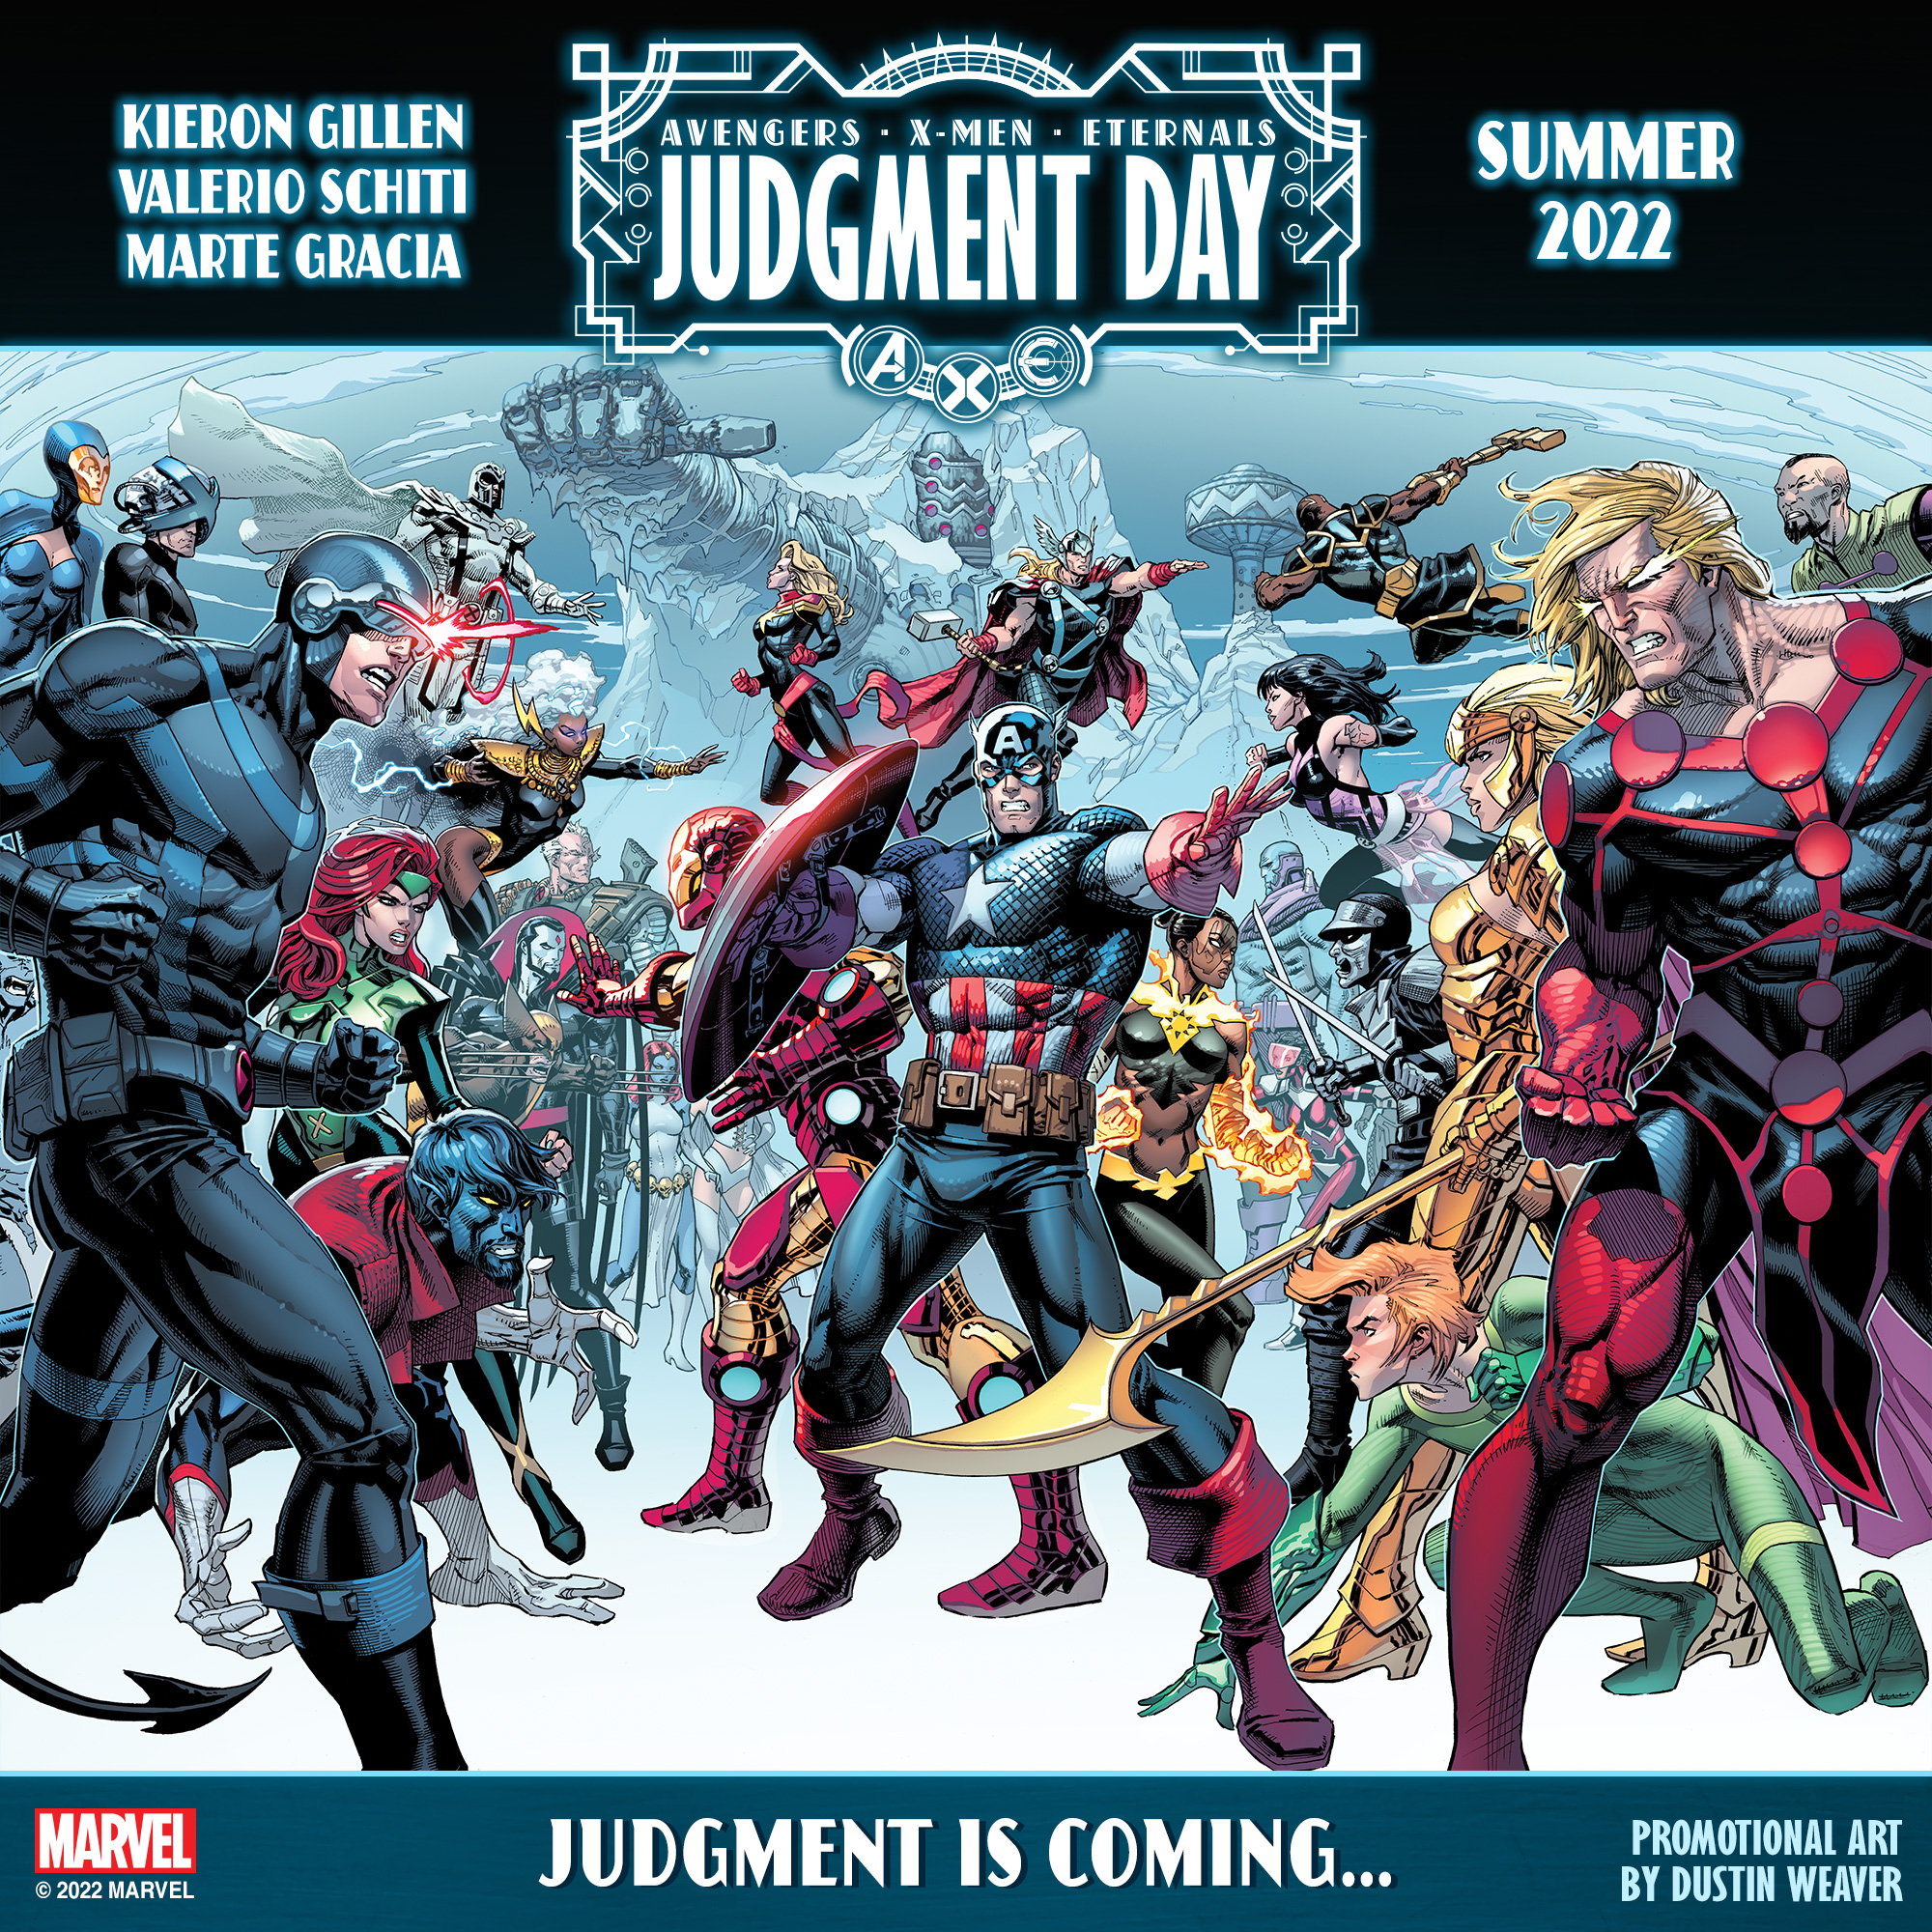 The Avengers X Men And Eternals Face Judgment Day In July Comicon